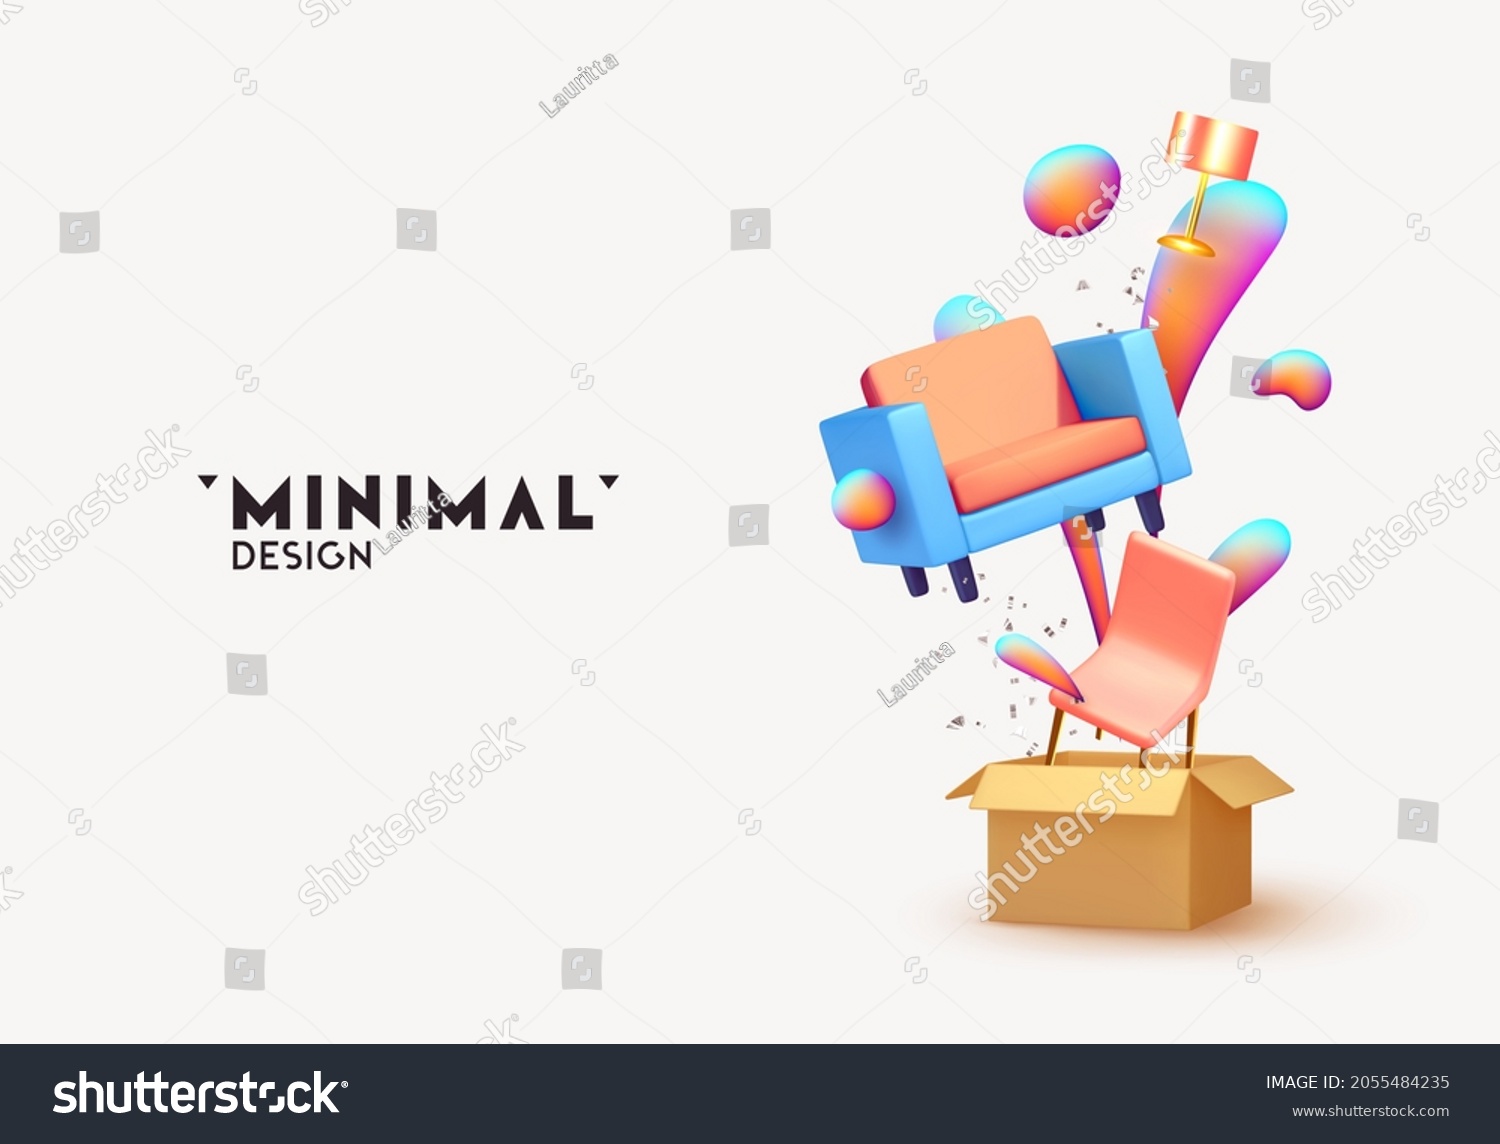 Abstract minimal design with realistic 3d objects. Open cardboard box with furniture armchair, chair and table lamp, move and delivery concept. Creative poster, banner. Vector illustration #2055484235